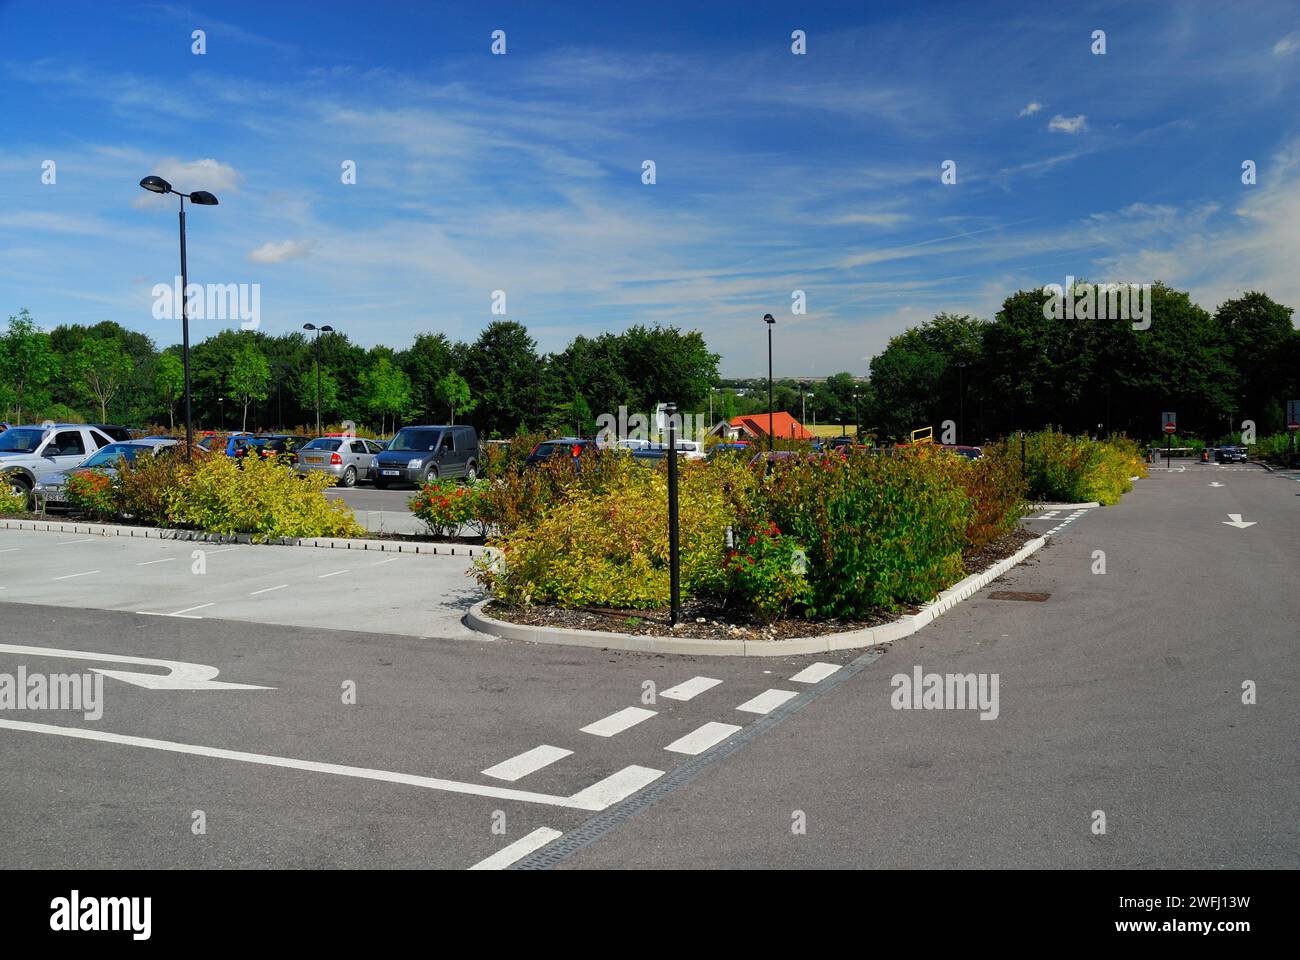 The car park at Britford Park and Ride, near Salisbury, Wiltshire. Stock Photo